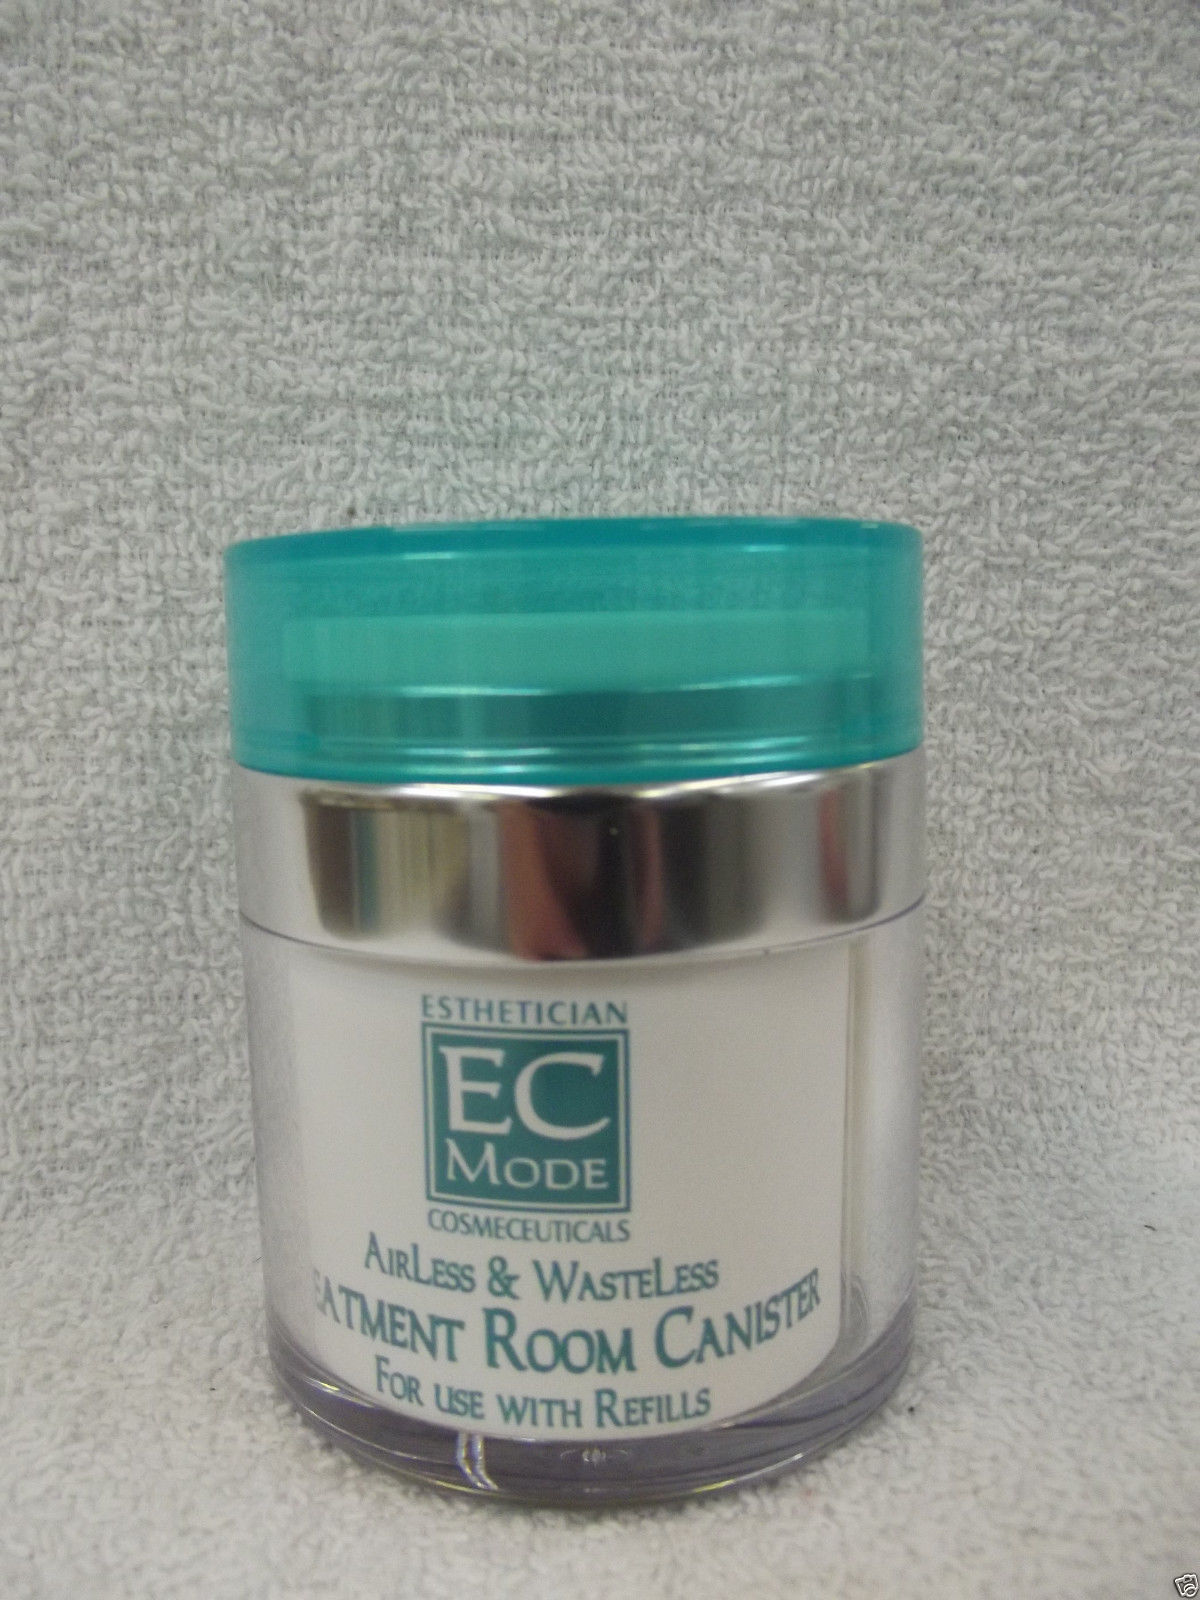 Primary image for Malibu EC MODE Airless & Wasteless Treatment Room CANISTER for Use With Refills